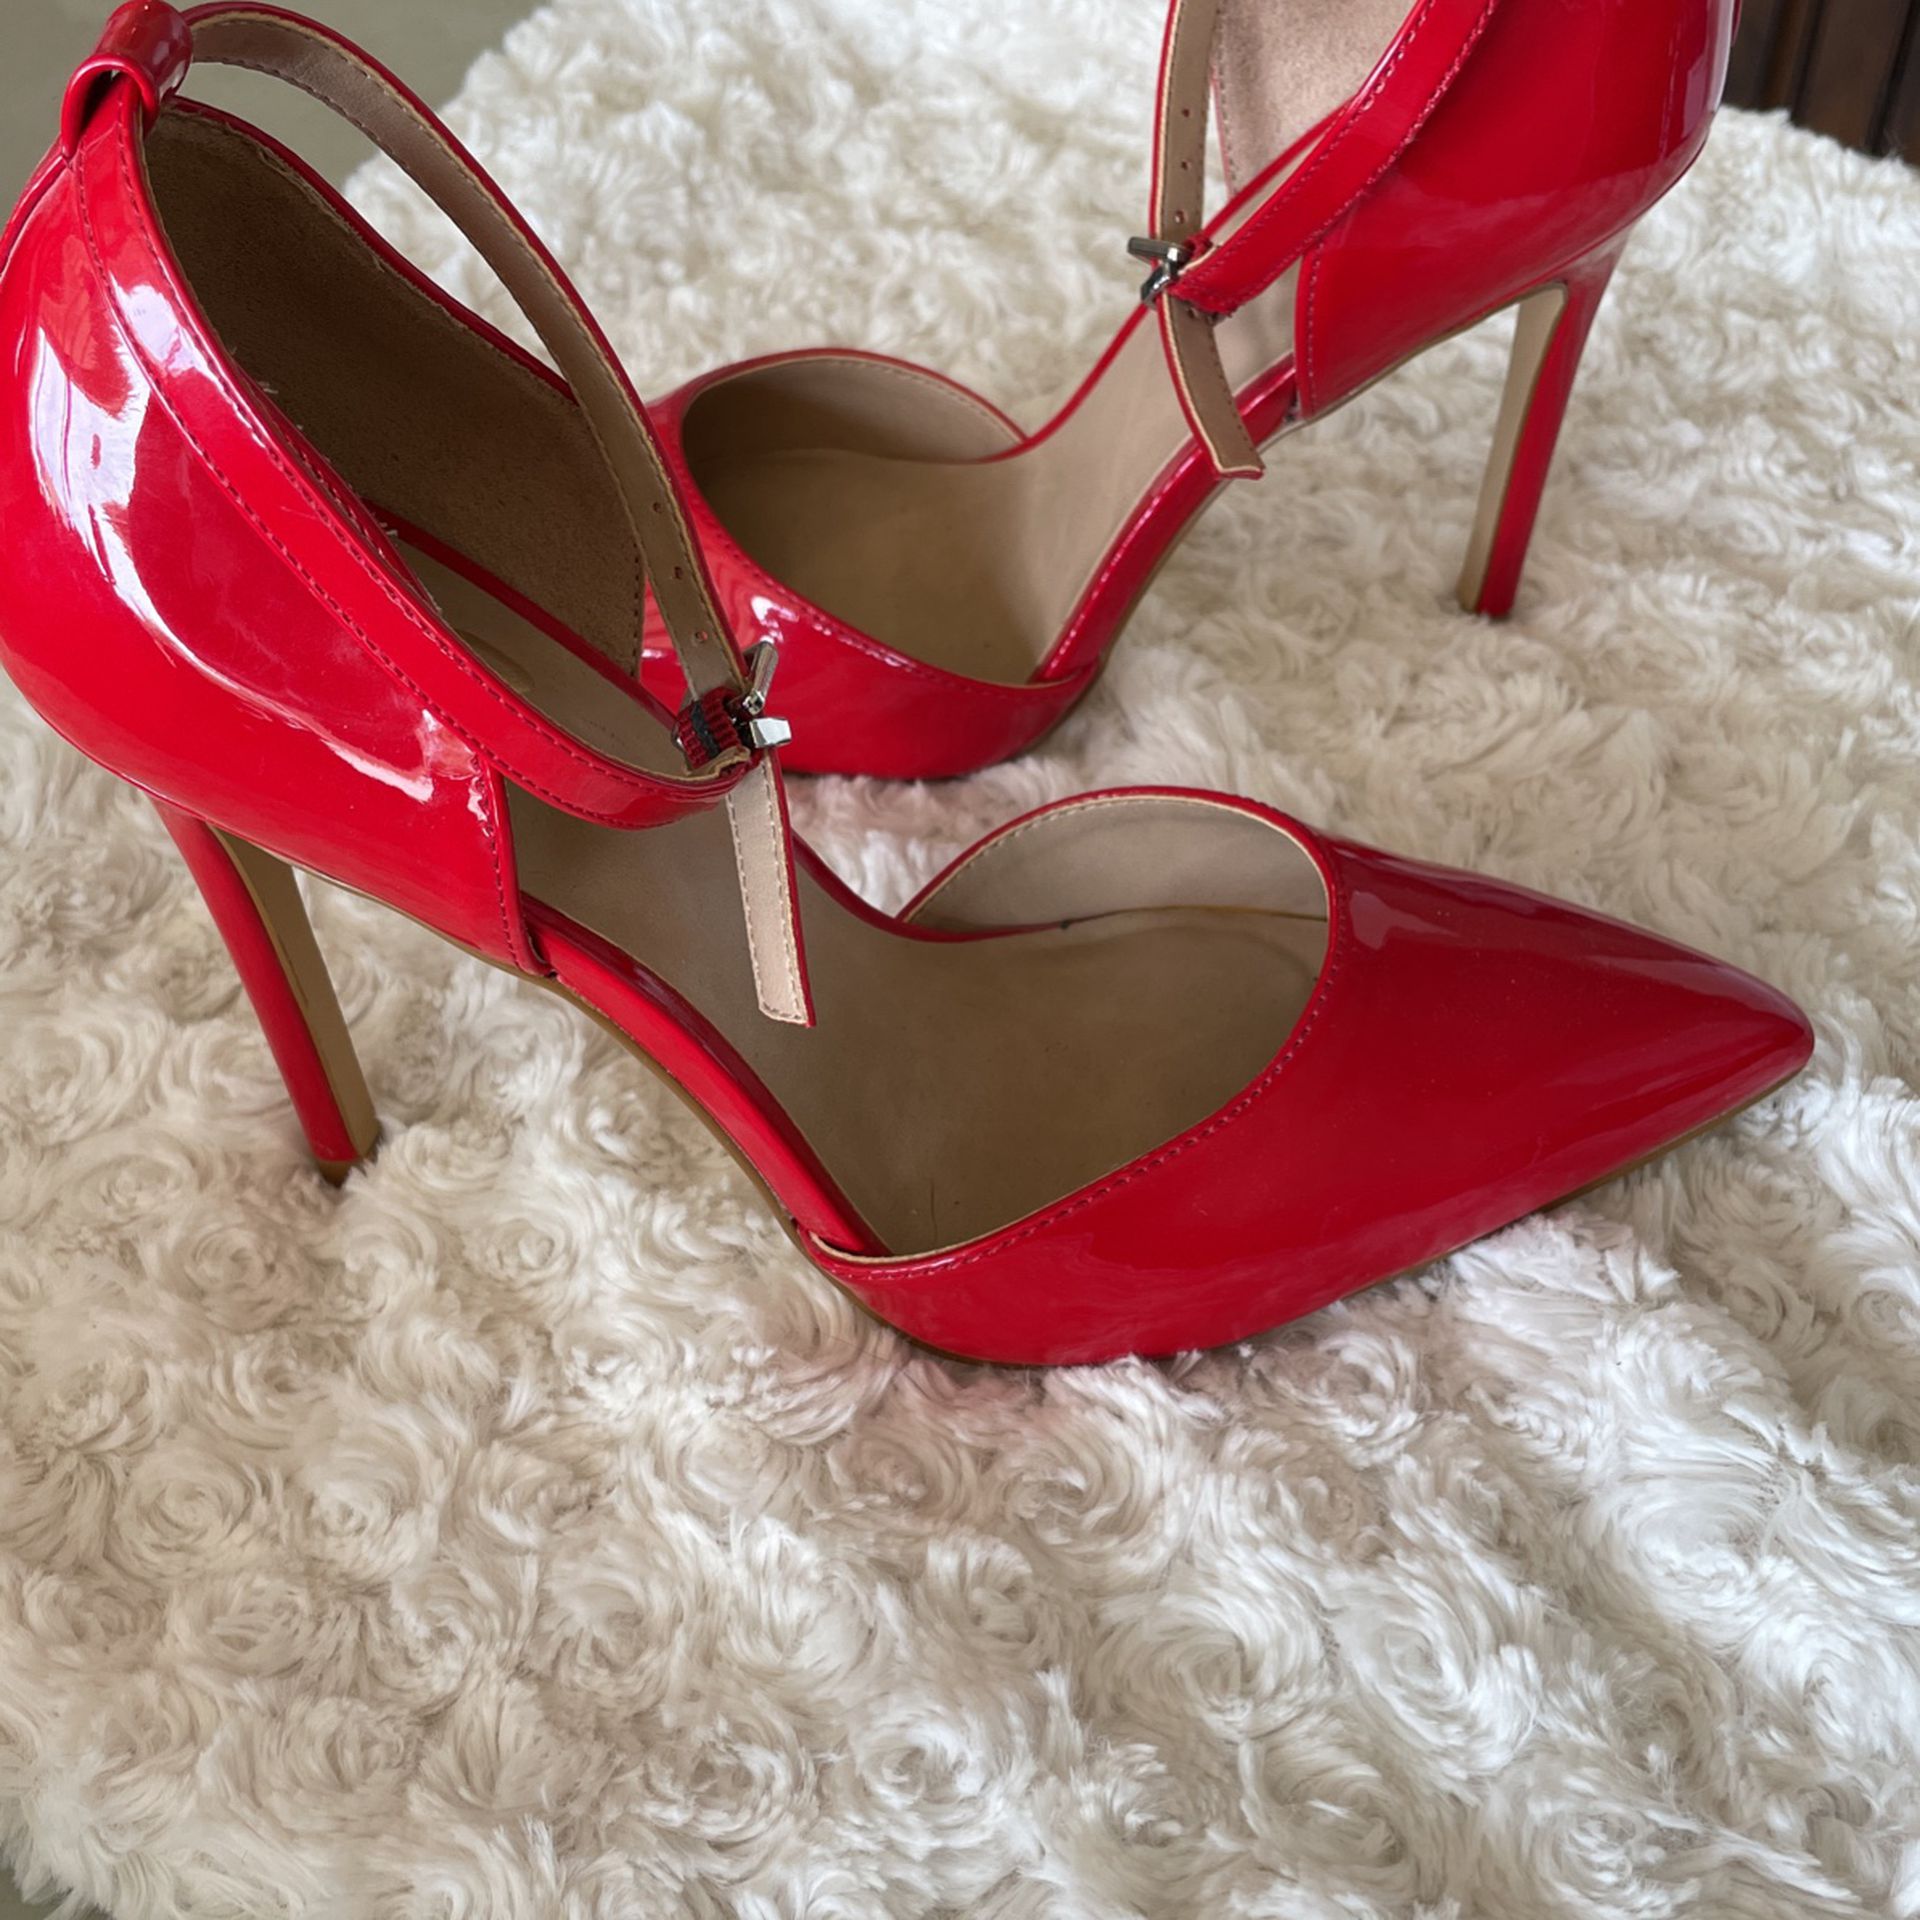 NEW Red Heels Size 6